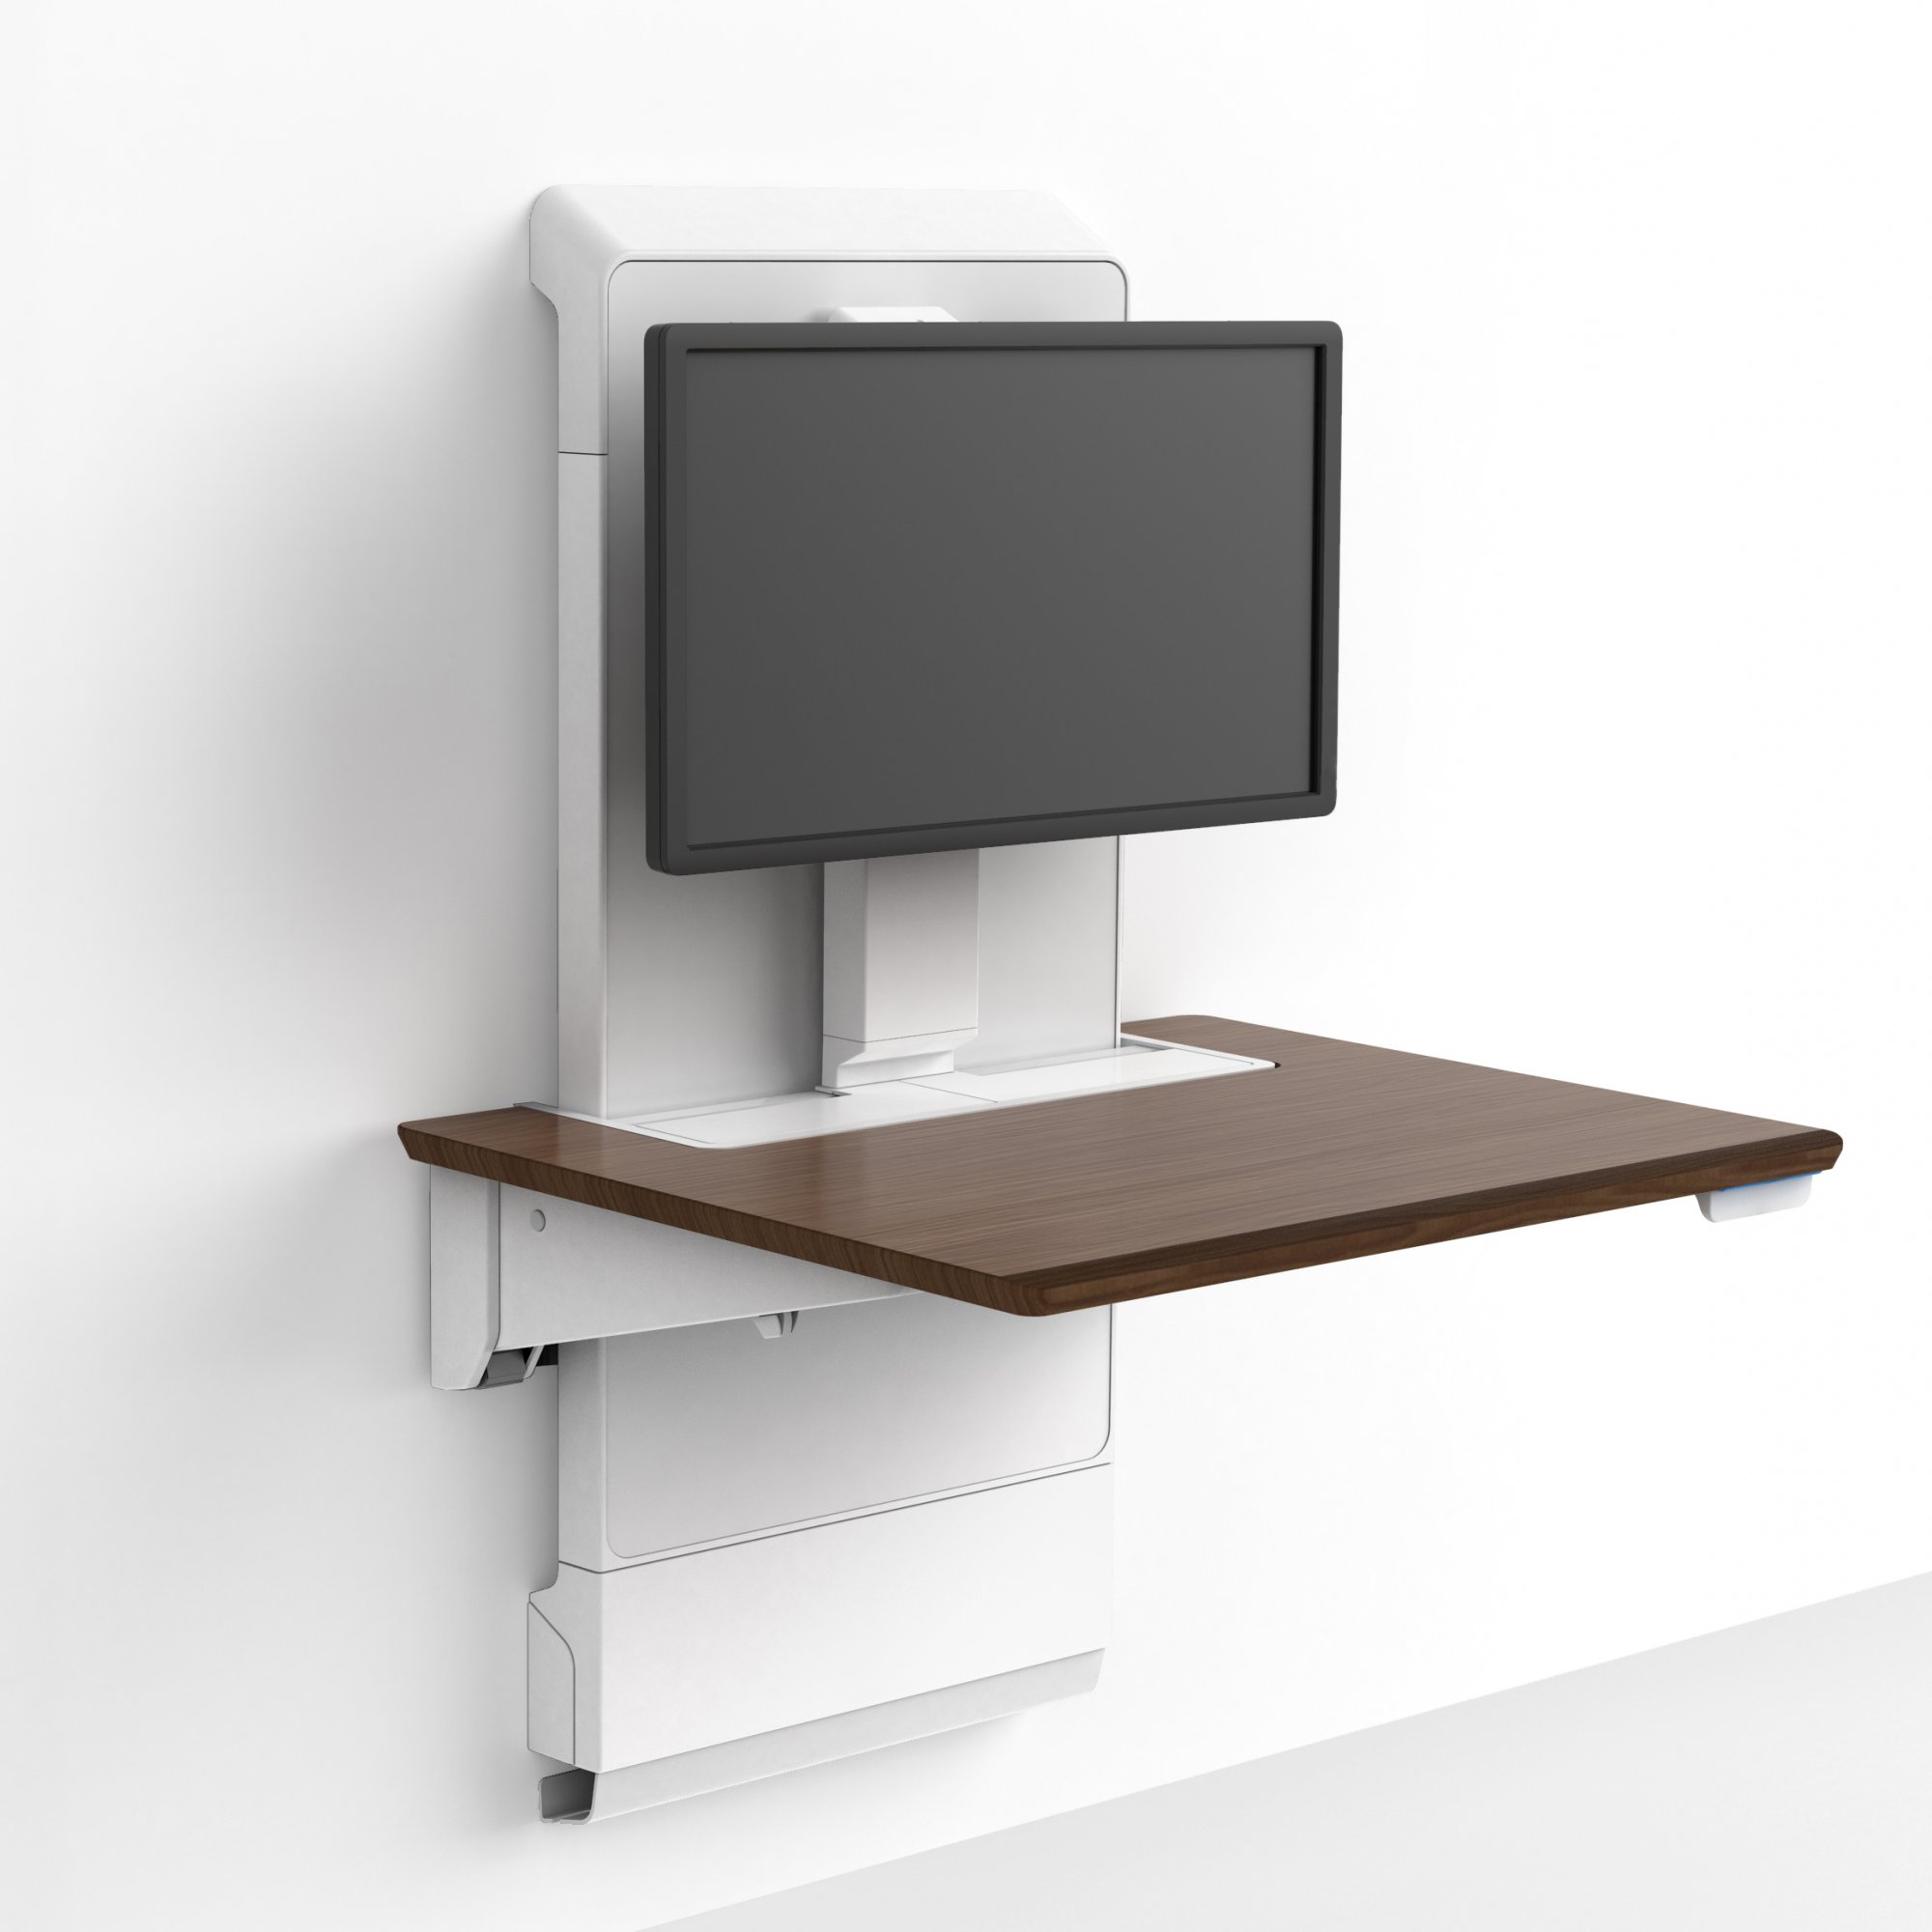 Add more flexibility and comfort to your WorkFit Elevate Sit-Stand Wall Desk